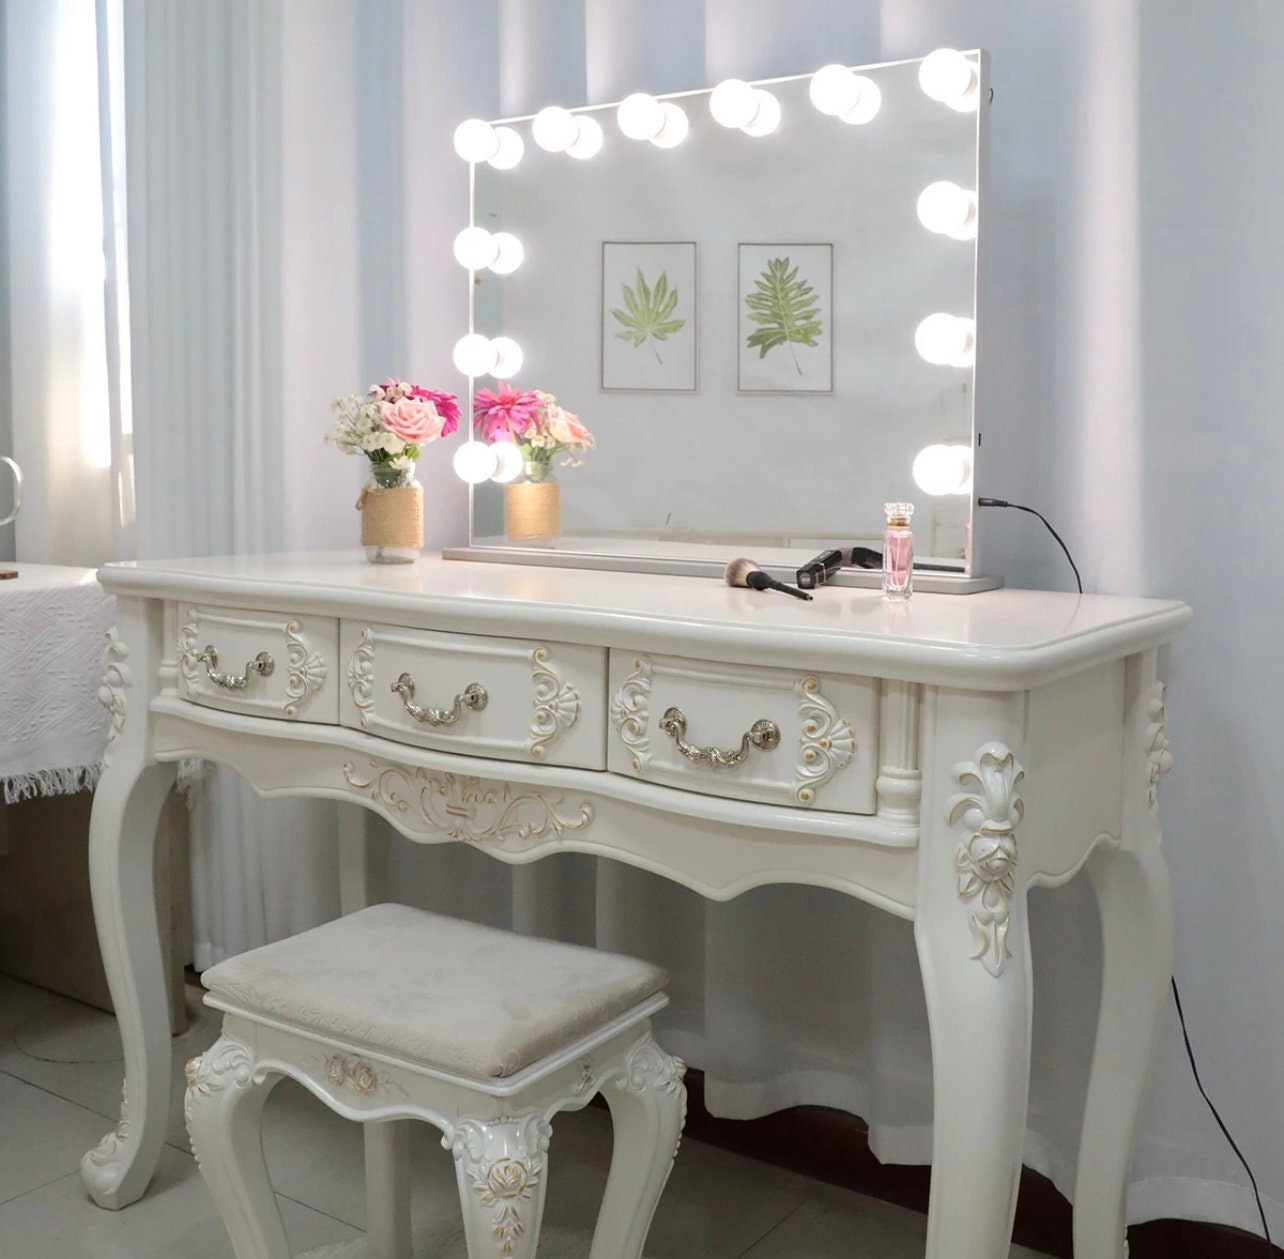 Hollywood Style USB Powered Makeup Mirror LED Lights with 10 Dimmable Light Bulbs Flexible Lighting Fixture 7000K for Bathroom,Makeup Dressing Table Mirror Not Include UNIFUN Vanity Mirror Lights 